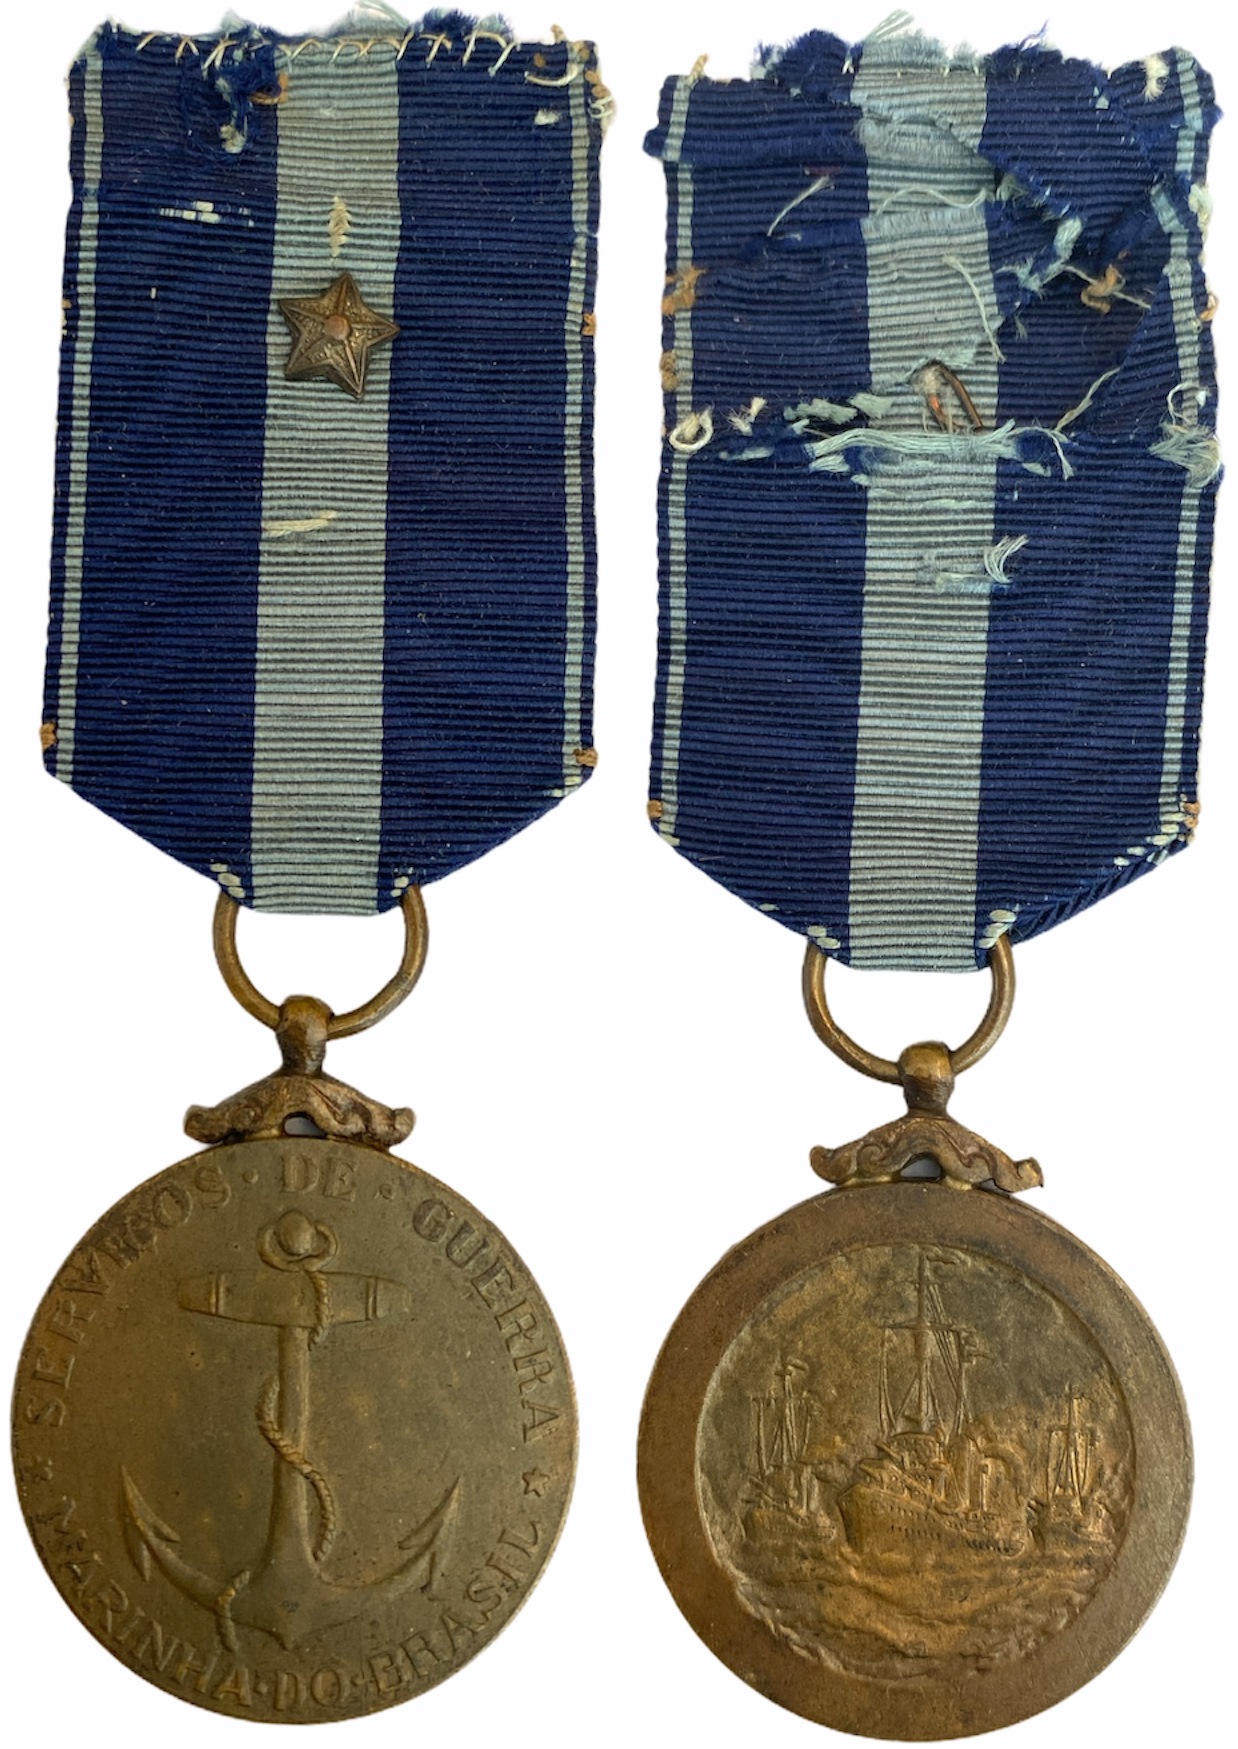 WAR SERVICE MEDAL WITH 1 STAR OF THE BRAZILIAN NAVY